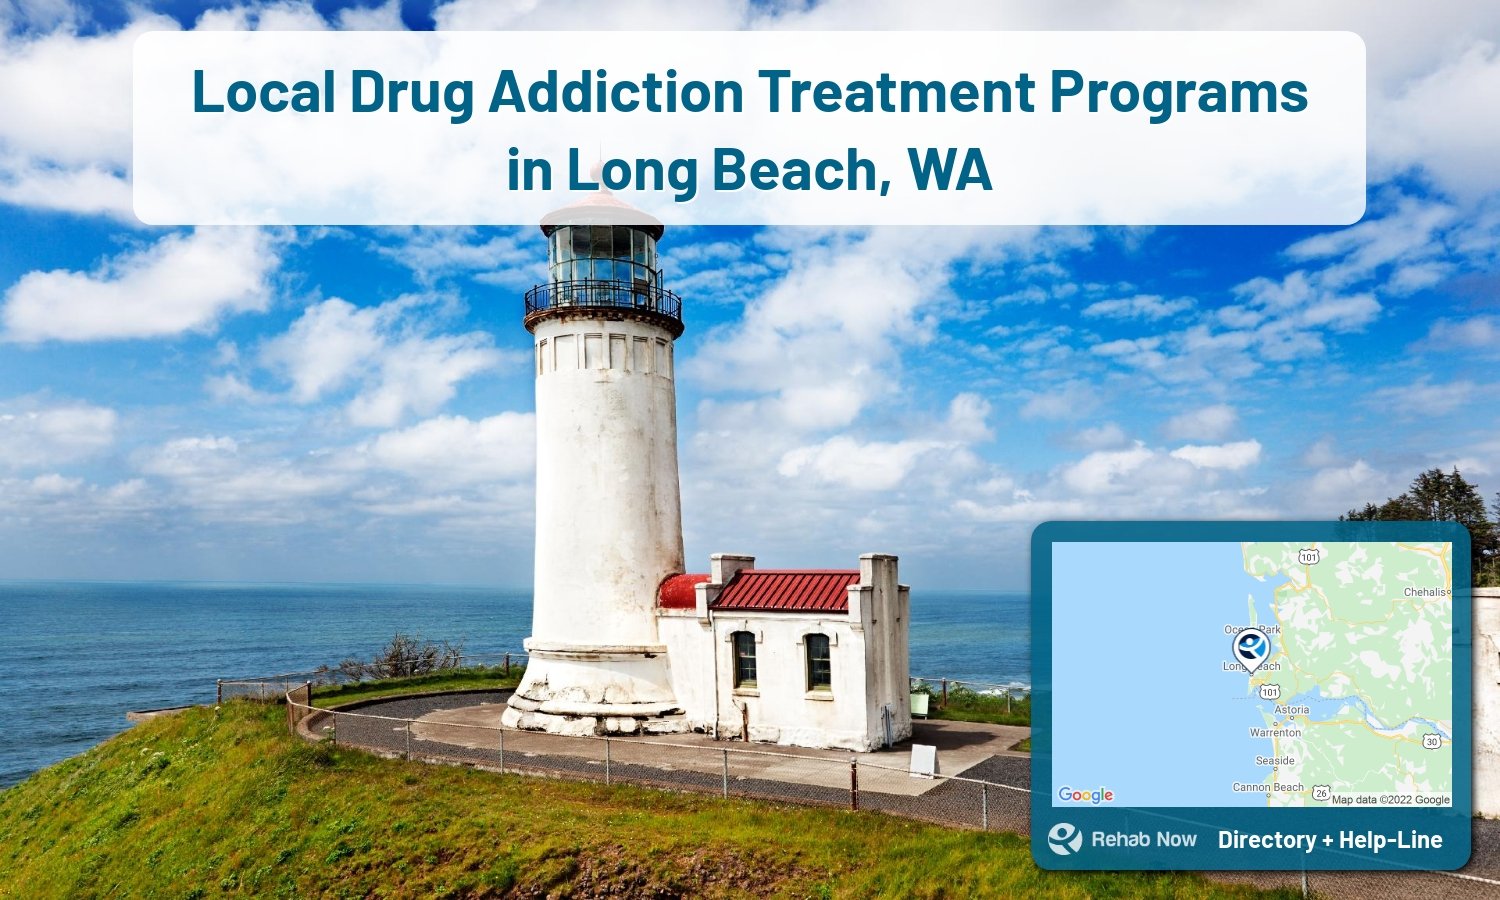 Long Beach, WA Treatment Centers. Find drug rehab in Long Beach, Washington, or detox and treatment programs. Get the right help now!